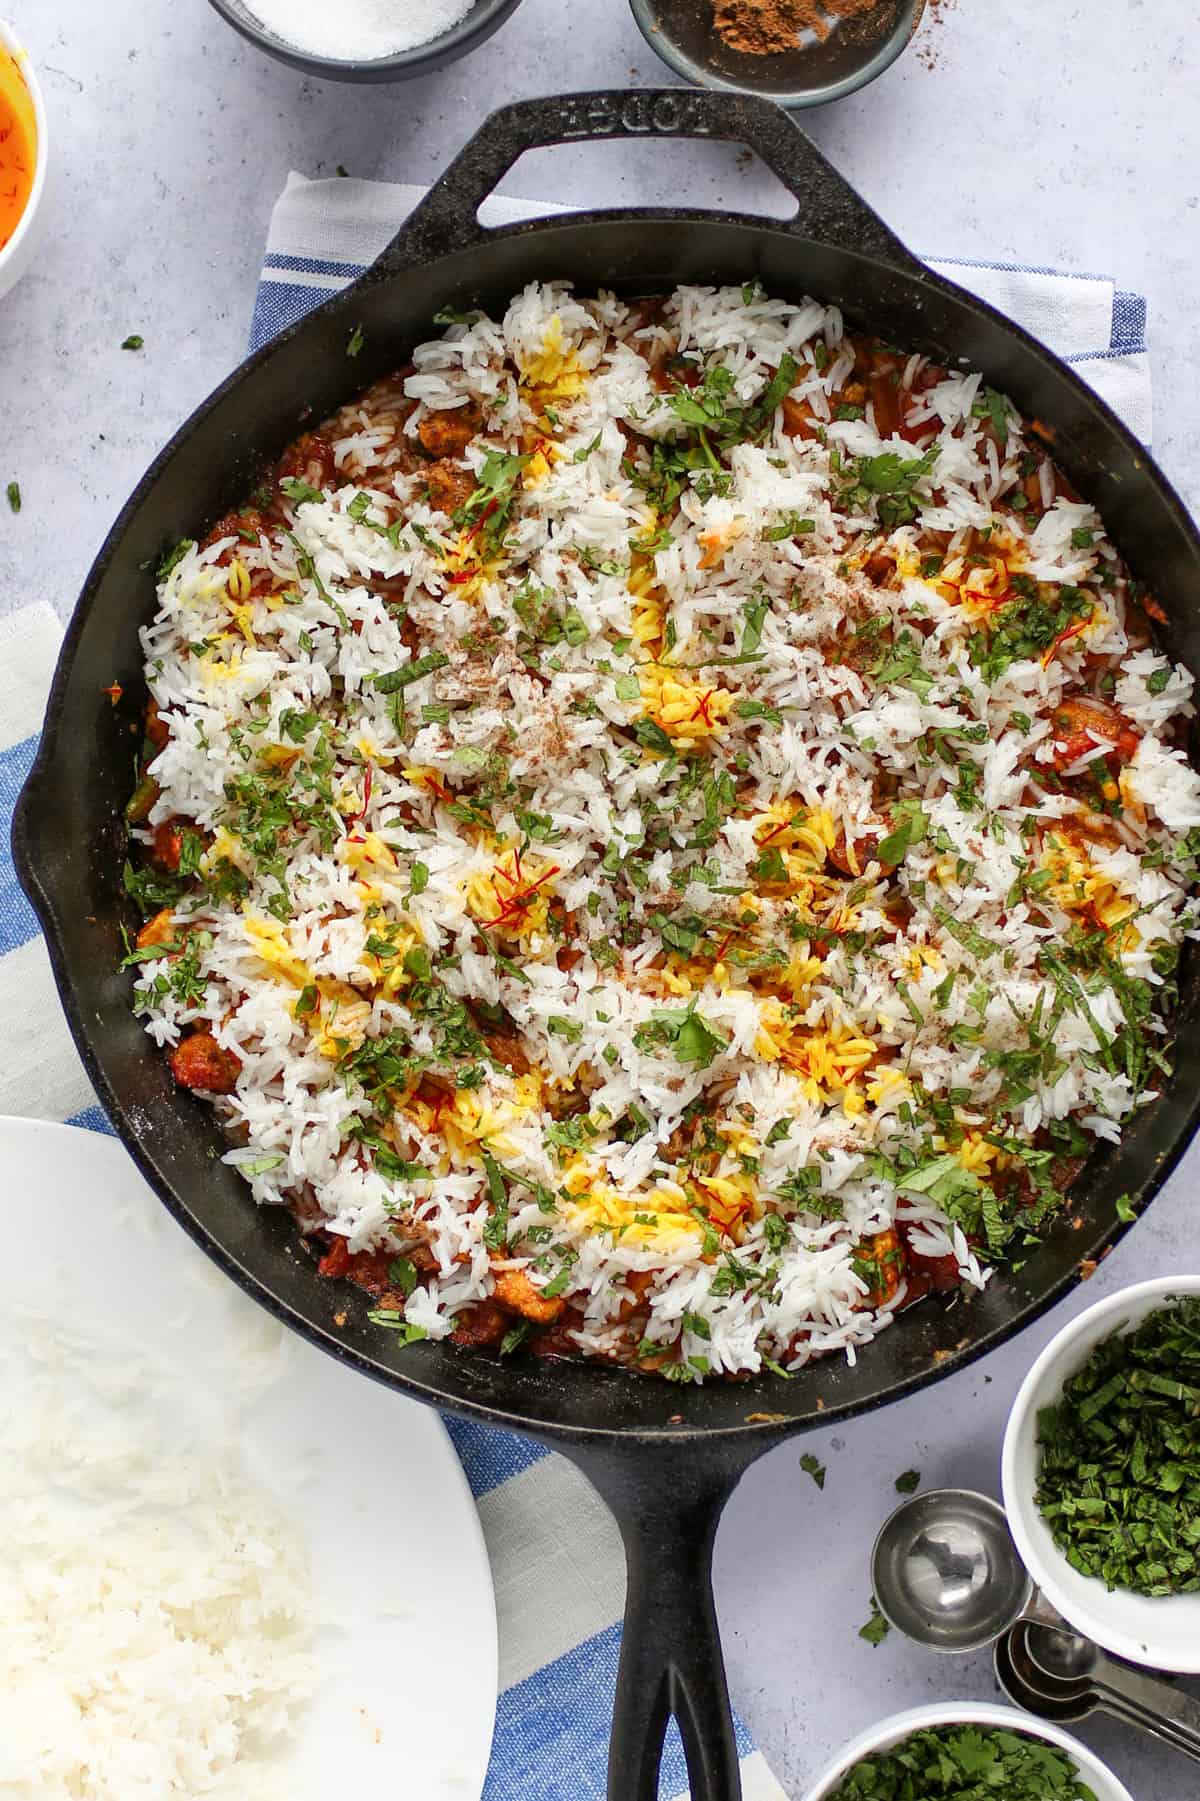 Cast iron skillet with fully assembled chicken biryani, the rice layer on top sprinkled with herbs and drizzled with saffron milk